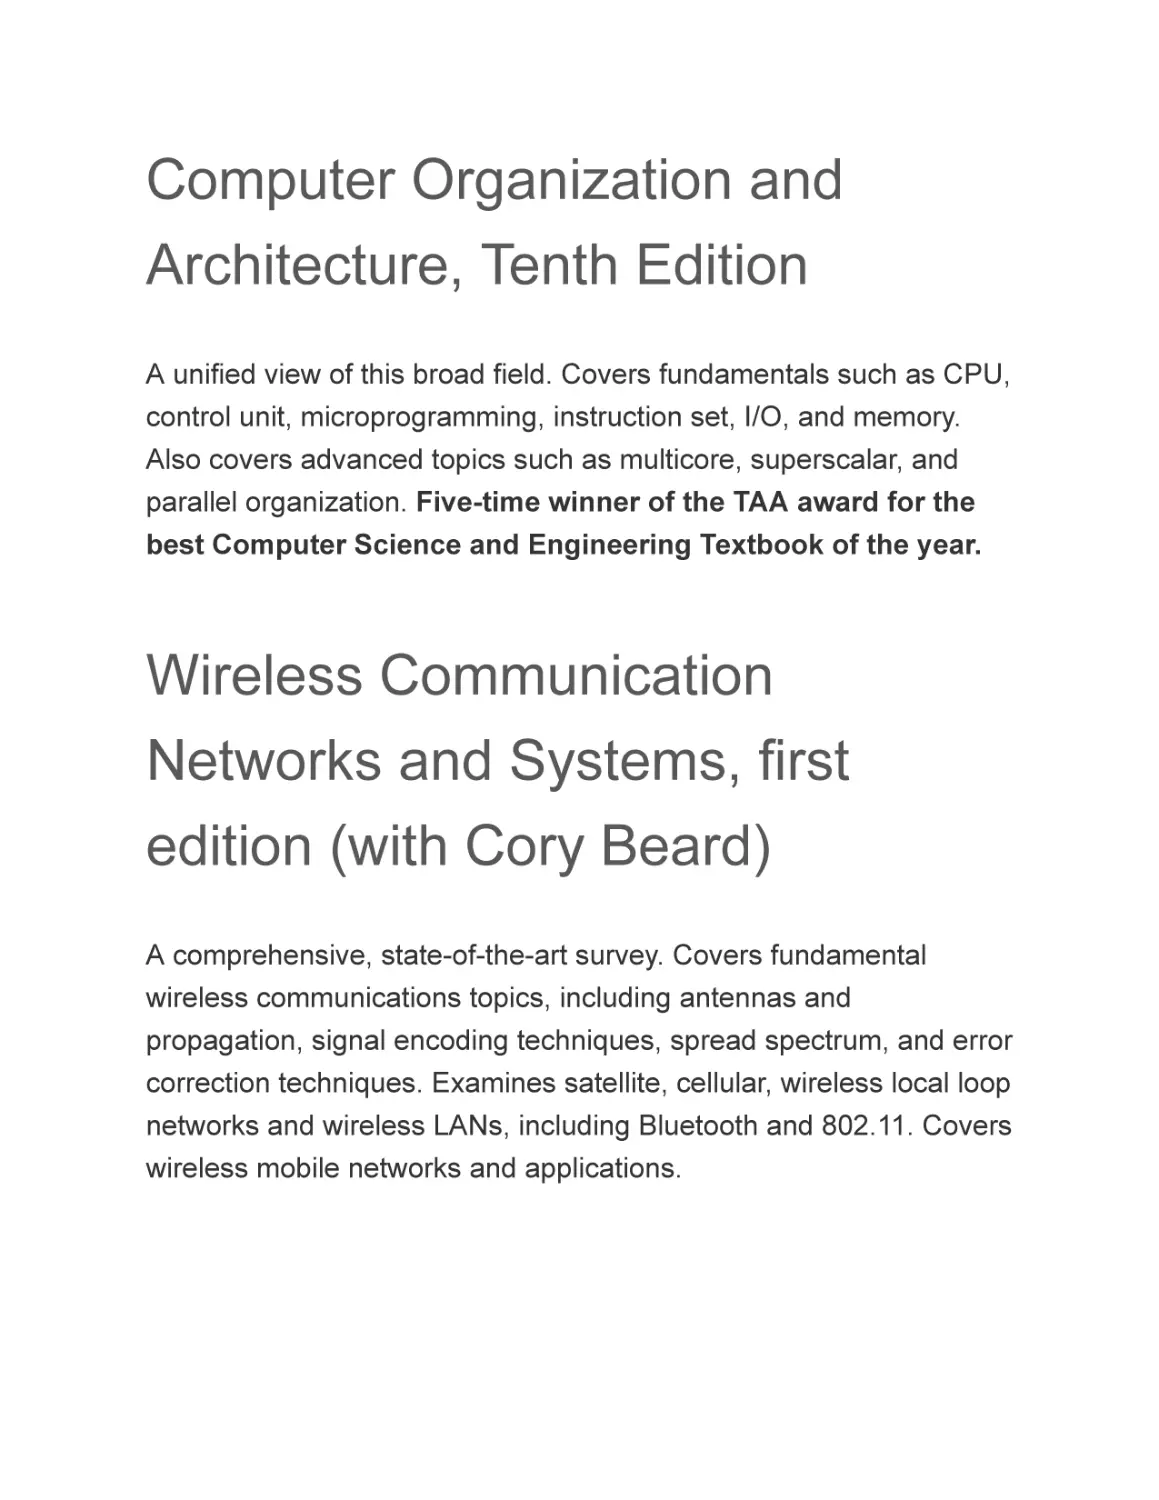 Computer Organization and Architecture, Tenth Edition
Wireless Communication Networks and Systems, first edition (with Cory Beard)